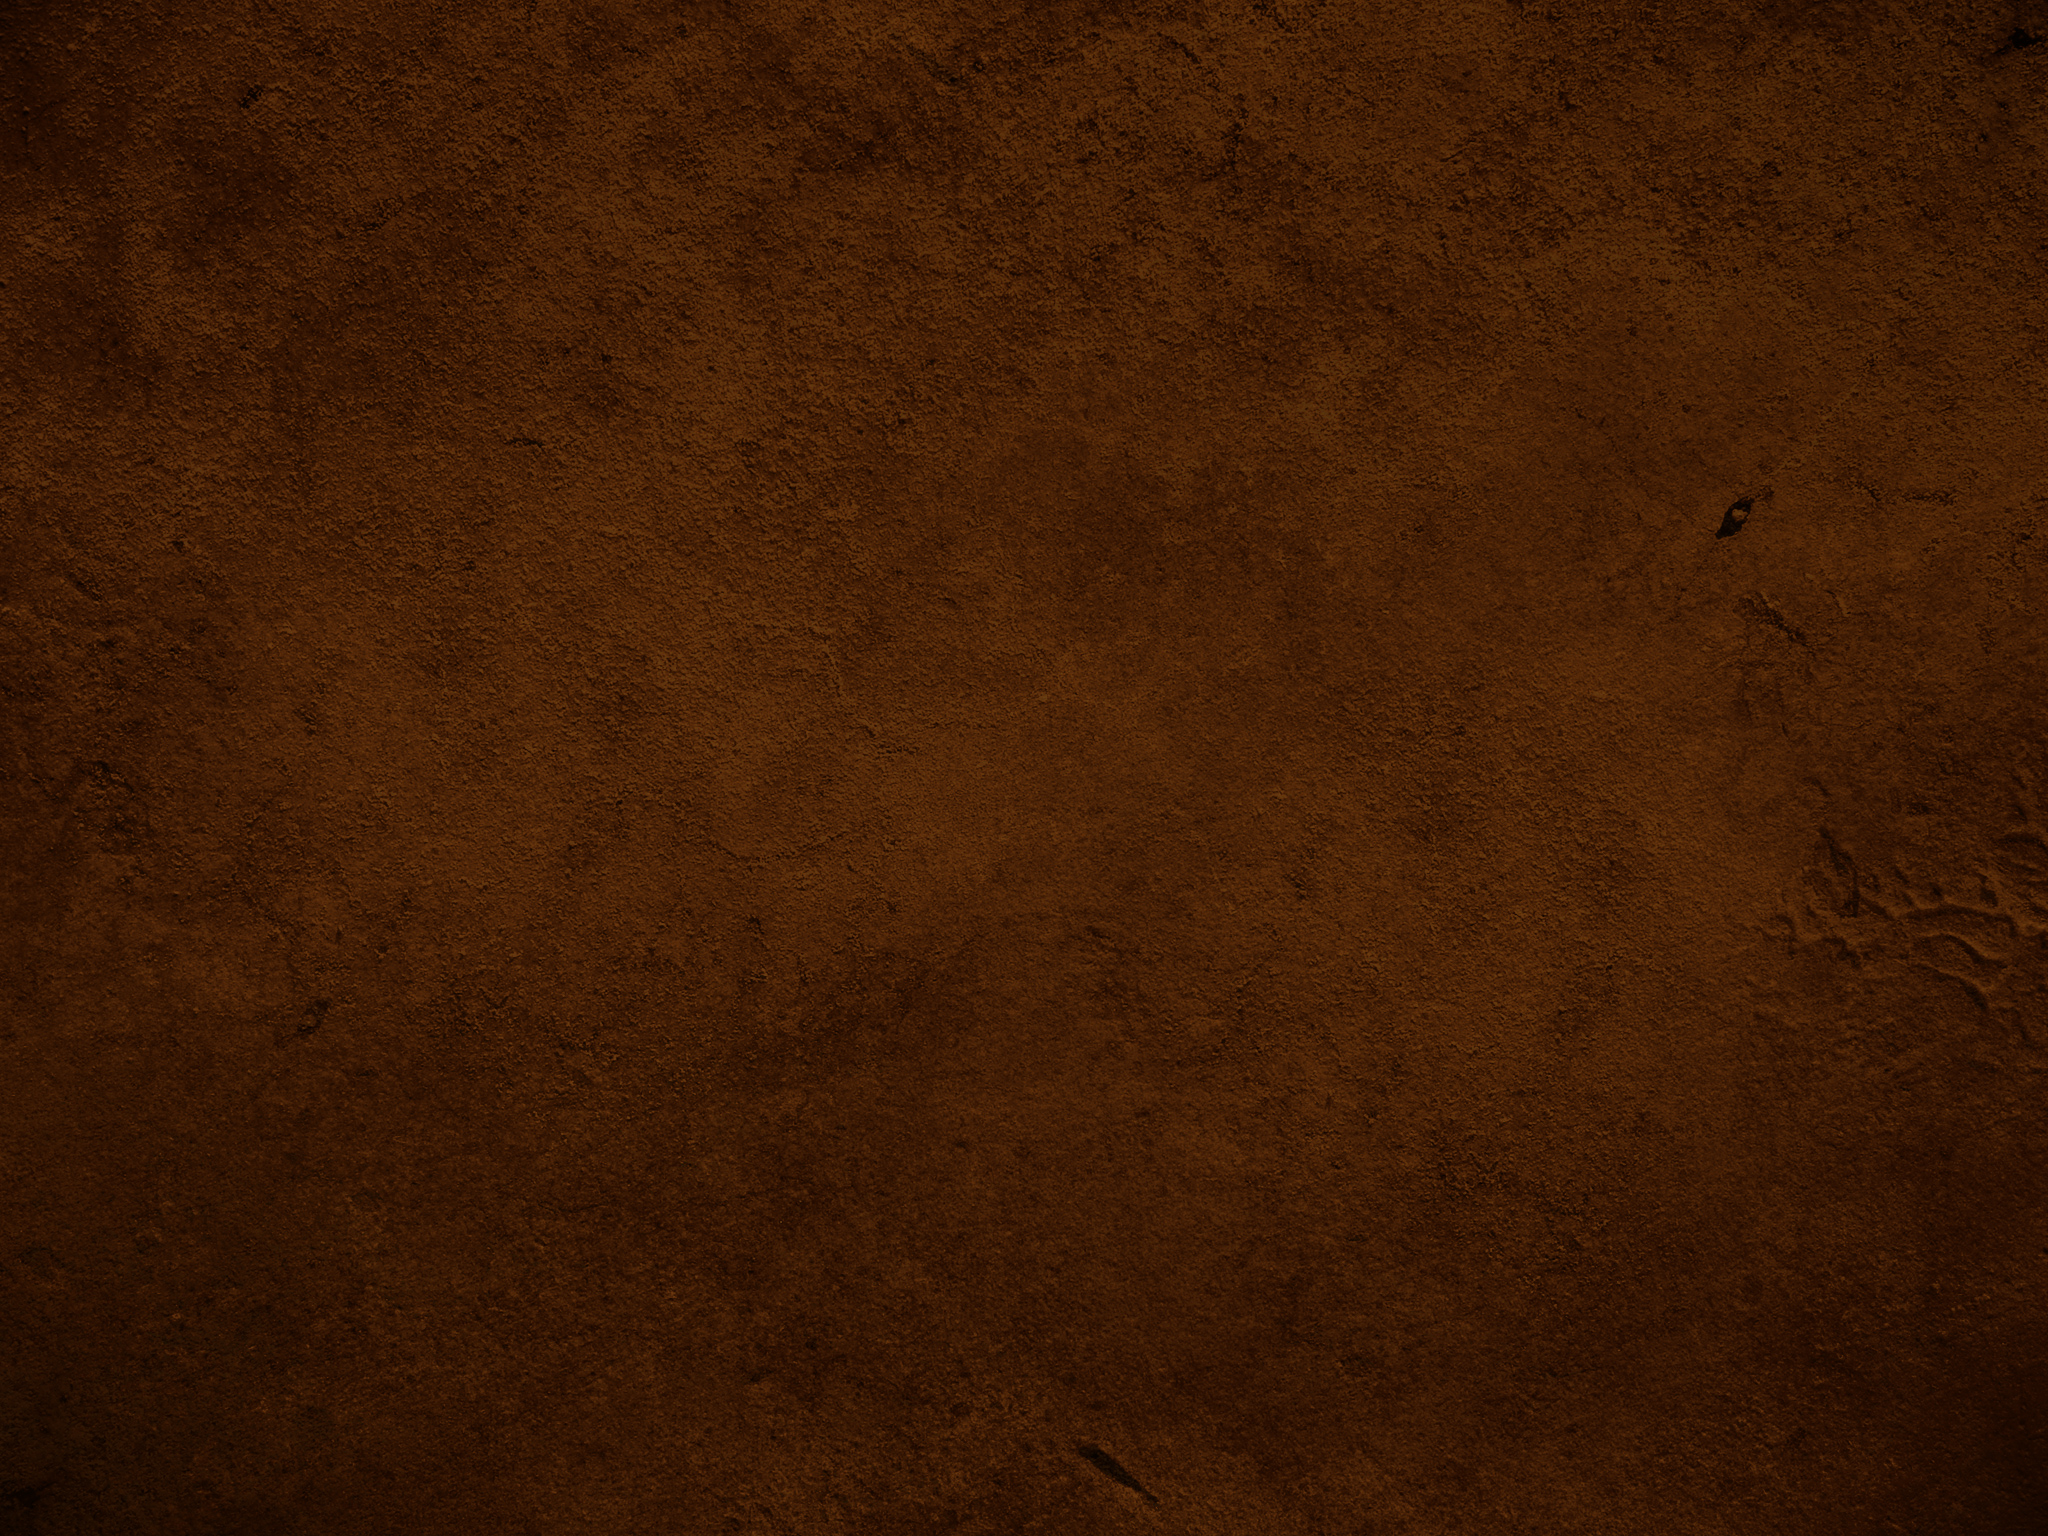 Related searches for Red Brown Texture Background